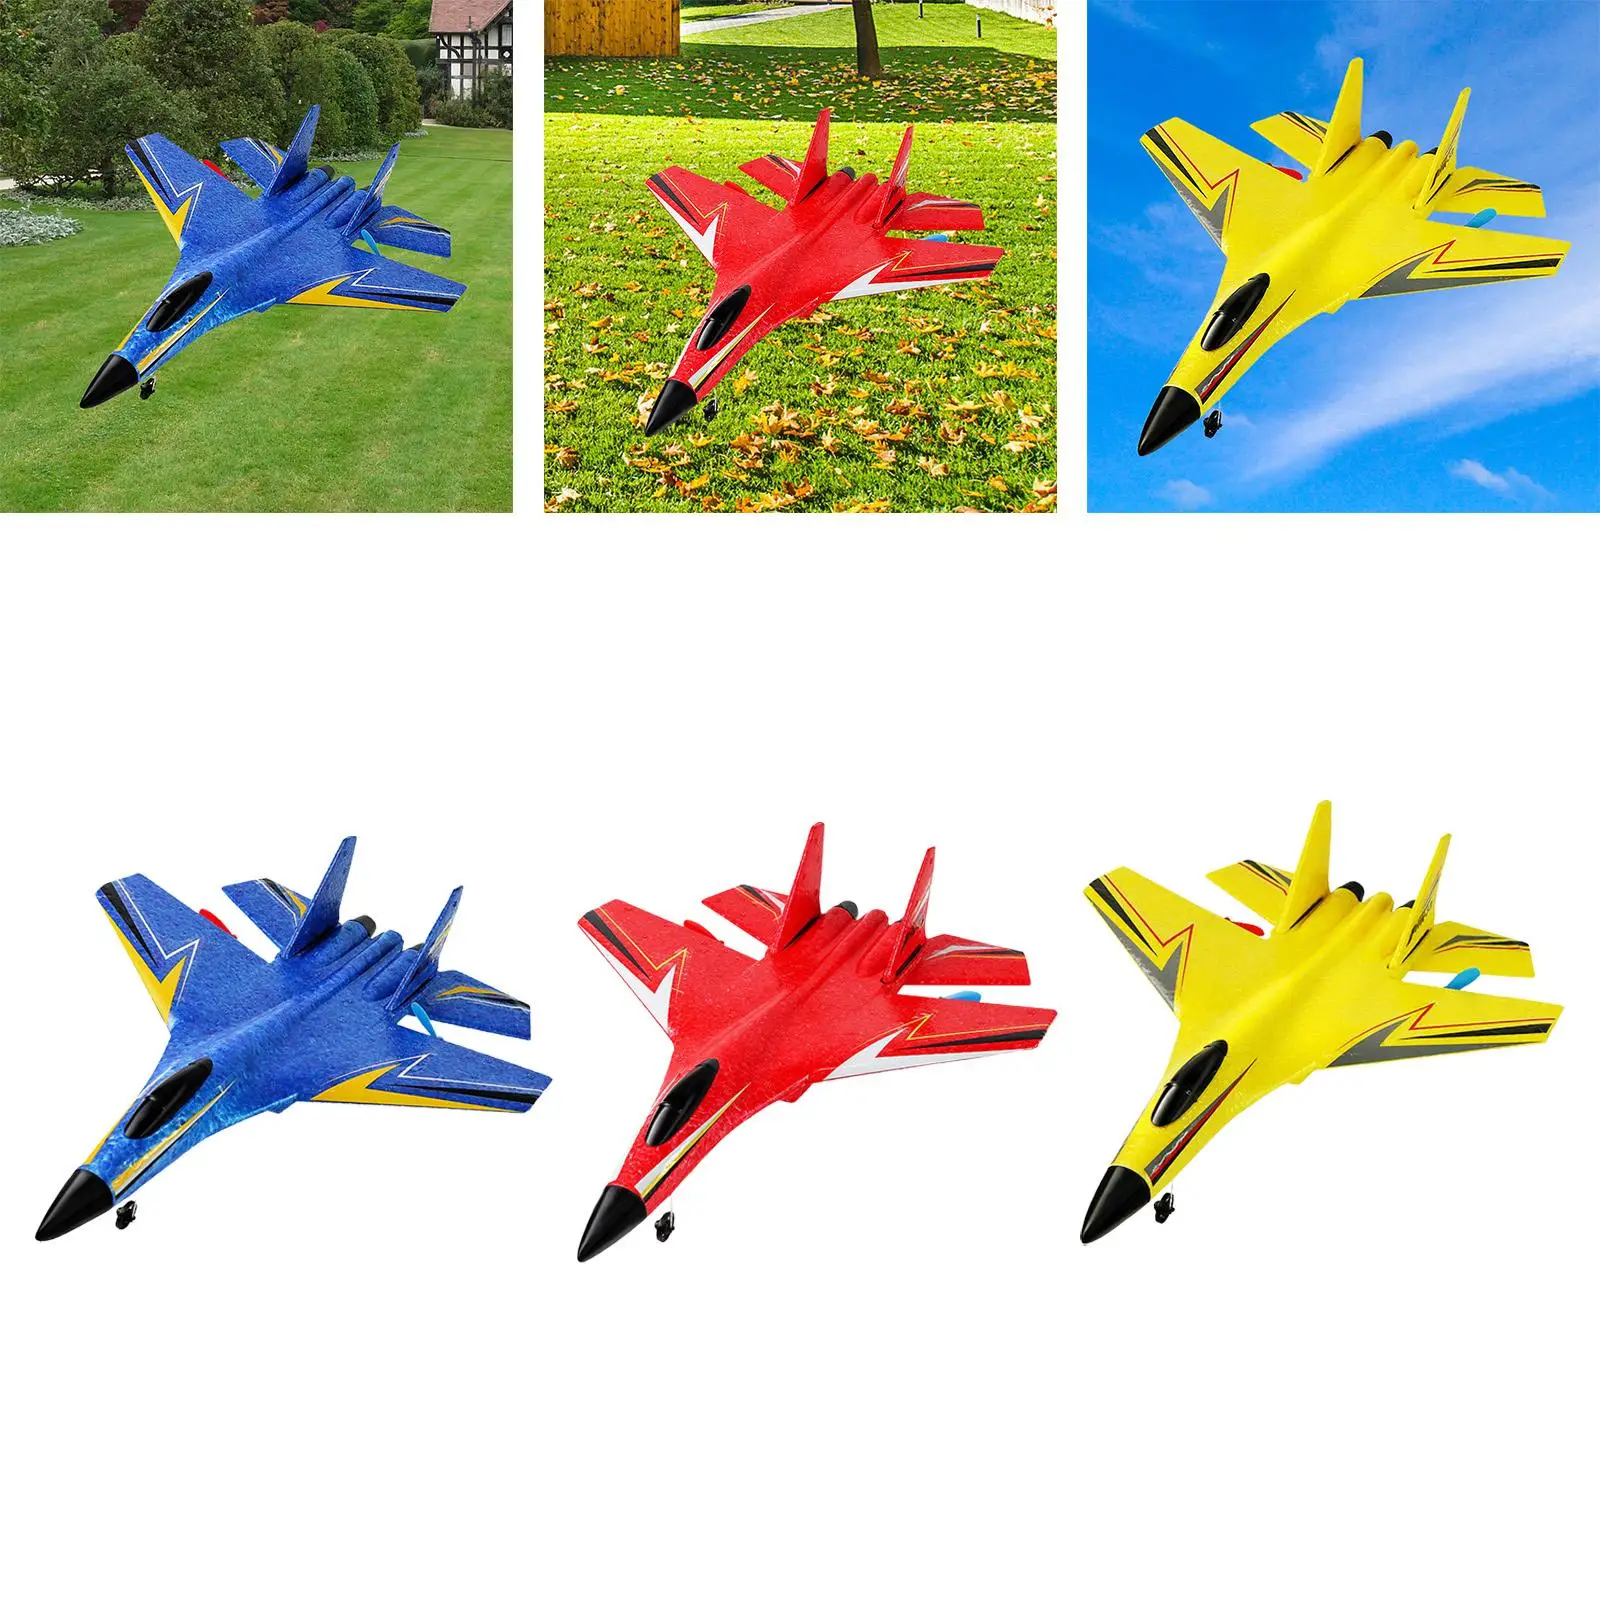 2.4G 2 Channel Remote Control Plane Fighter Glider RC Fixed Wing Plane for Children Kids Beginners Boys Girls Adults